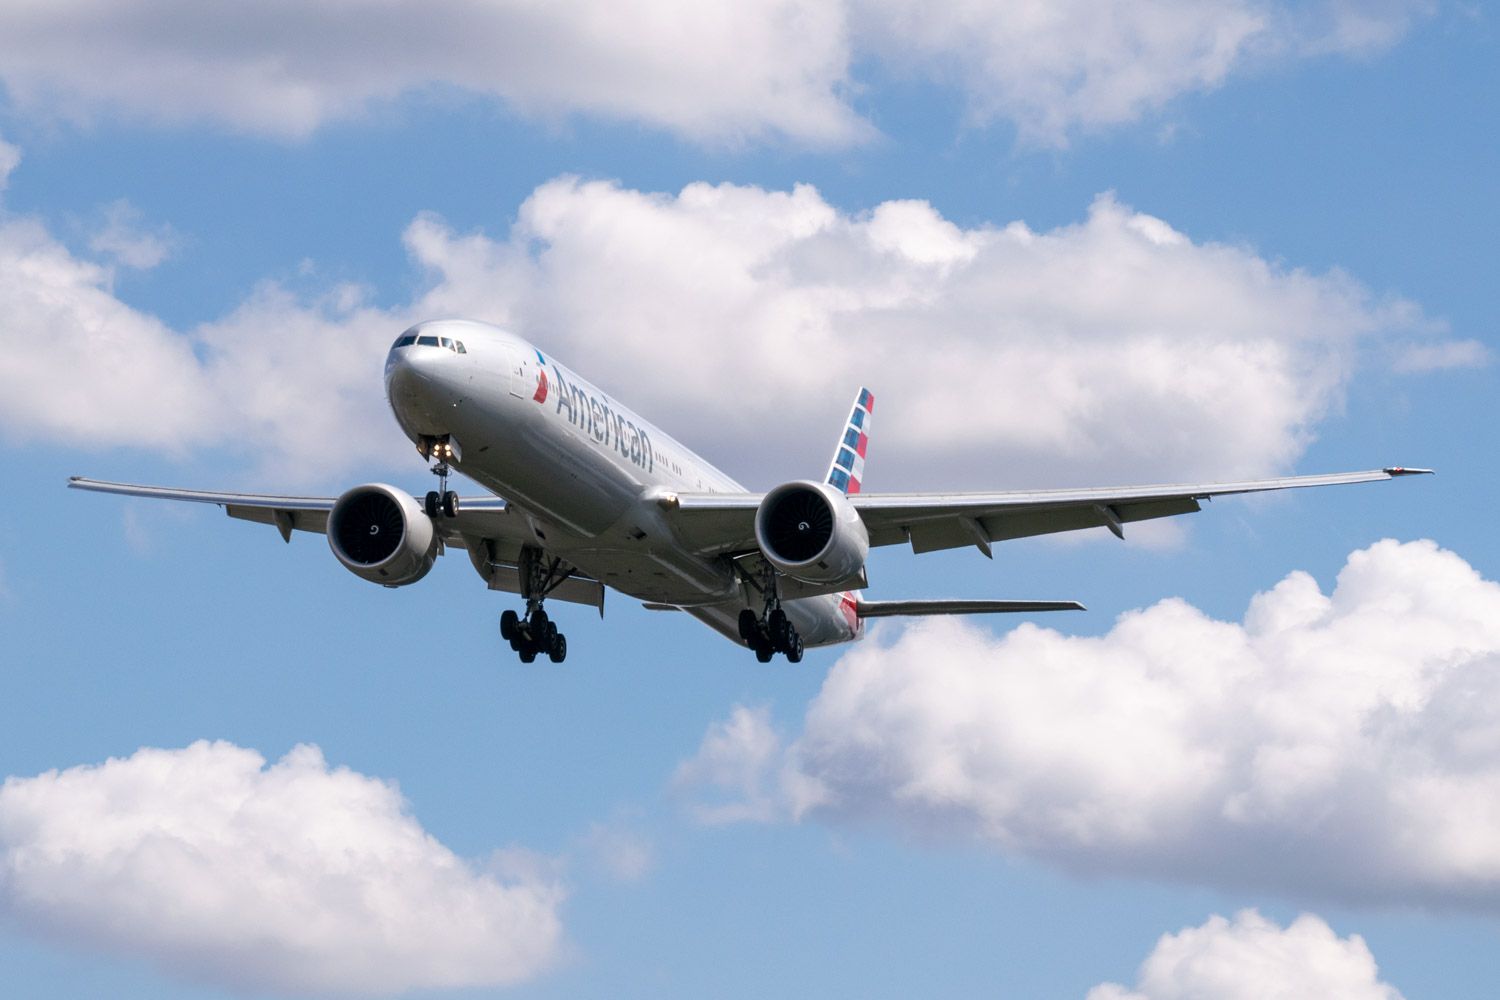 2019-238 - American Airlines Boeing 777 With Gear and Flaps Down In Front of Puffy Clouds